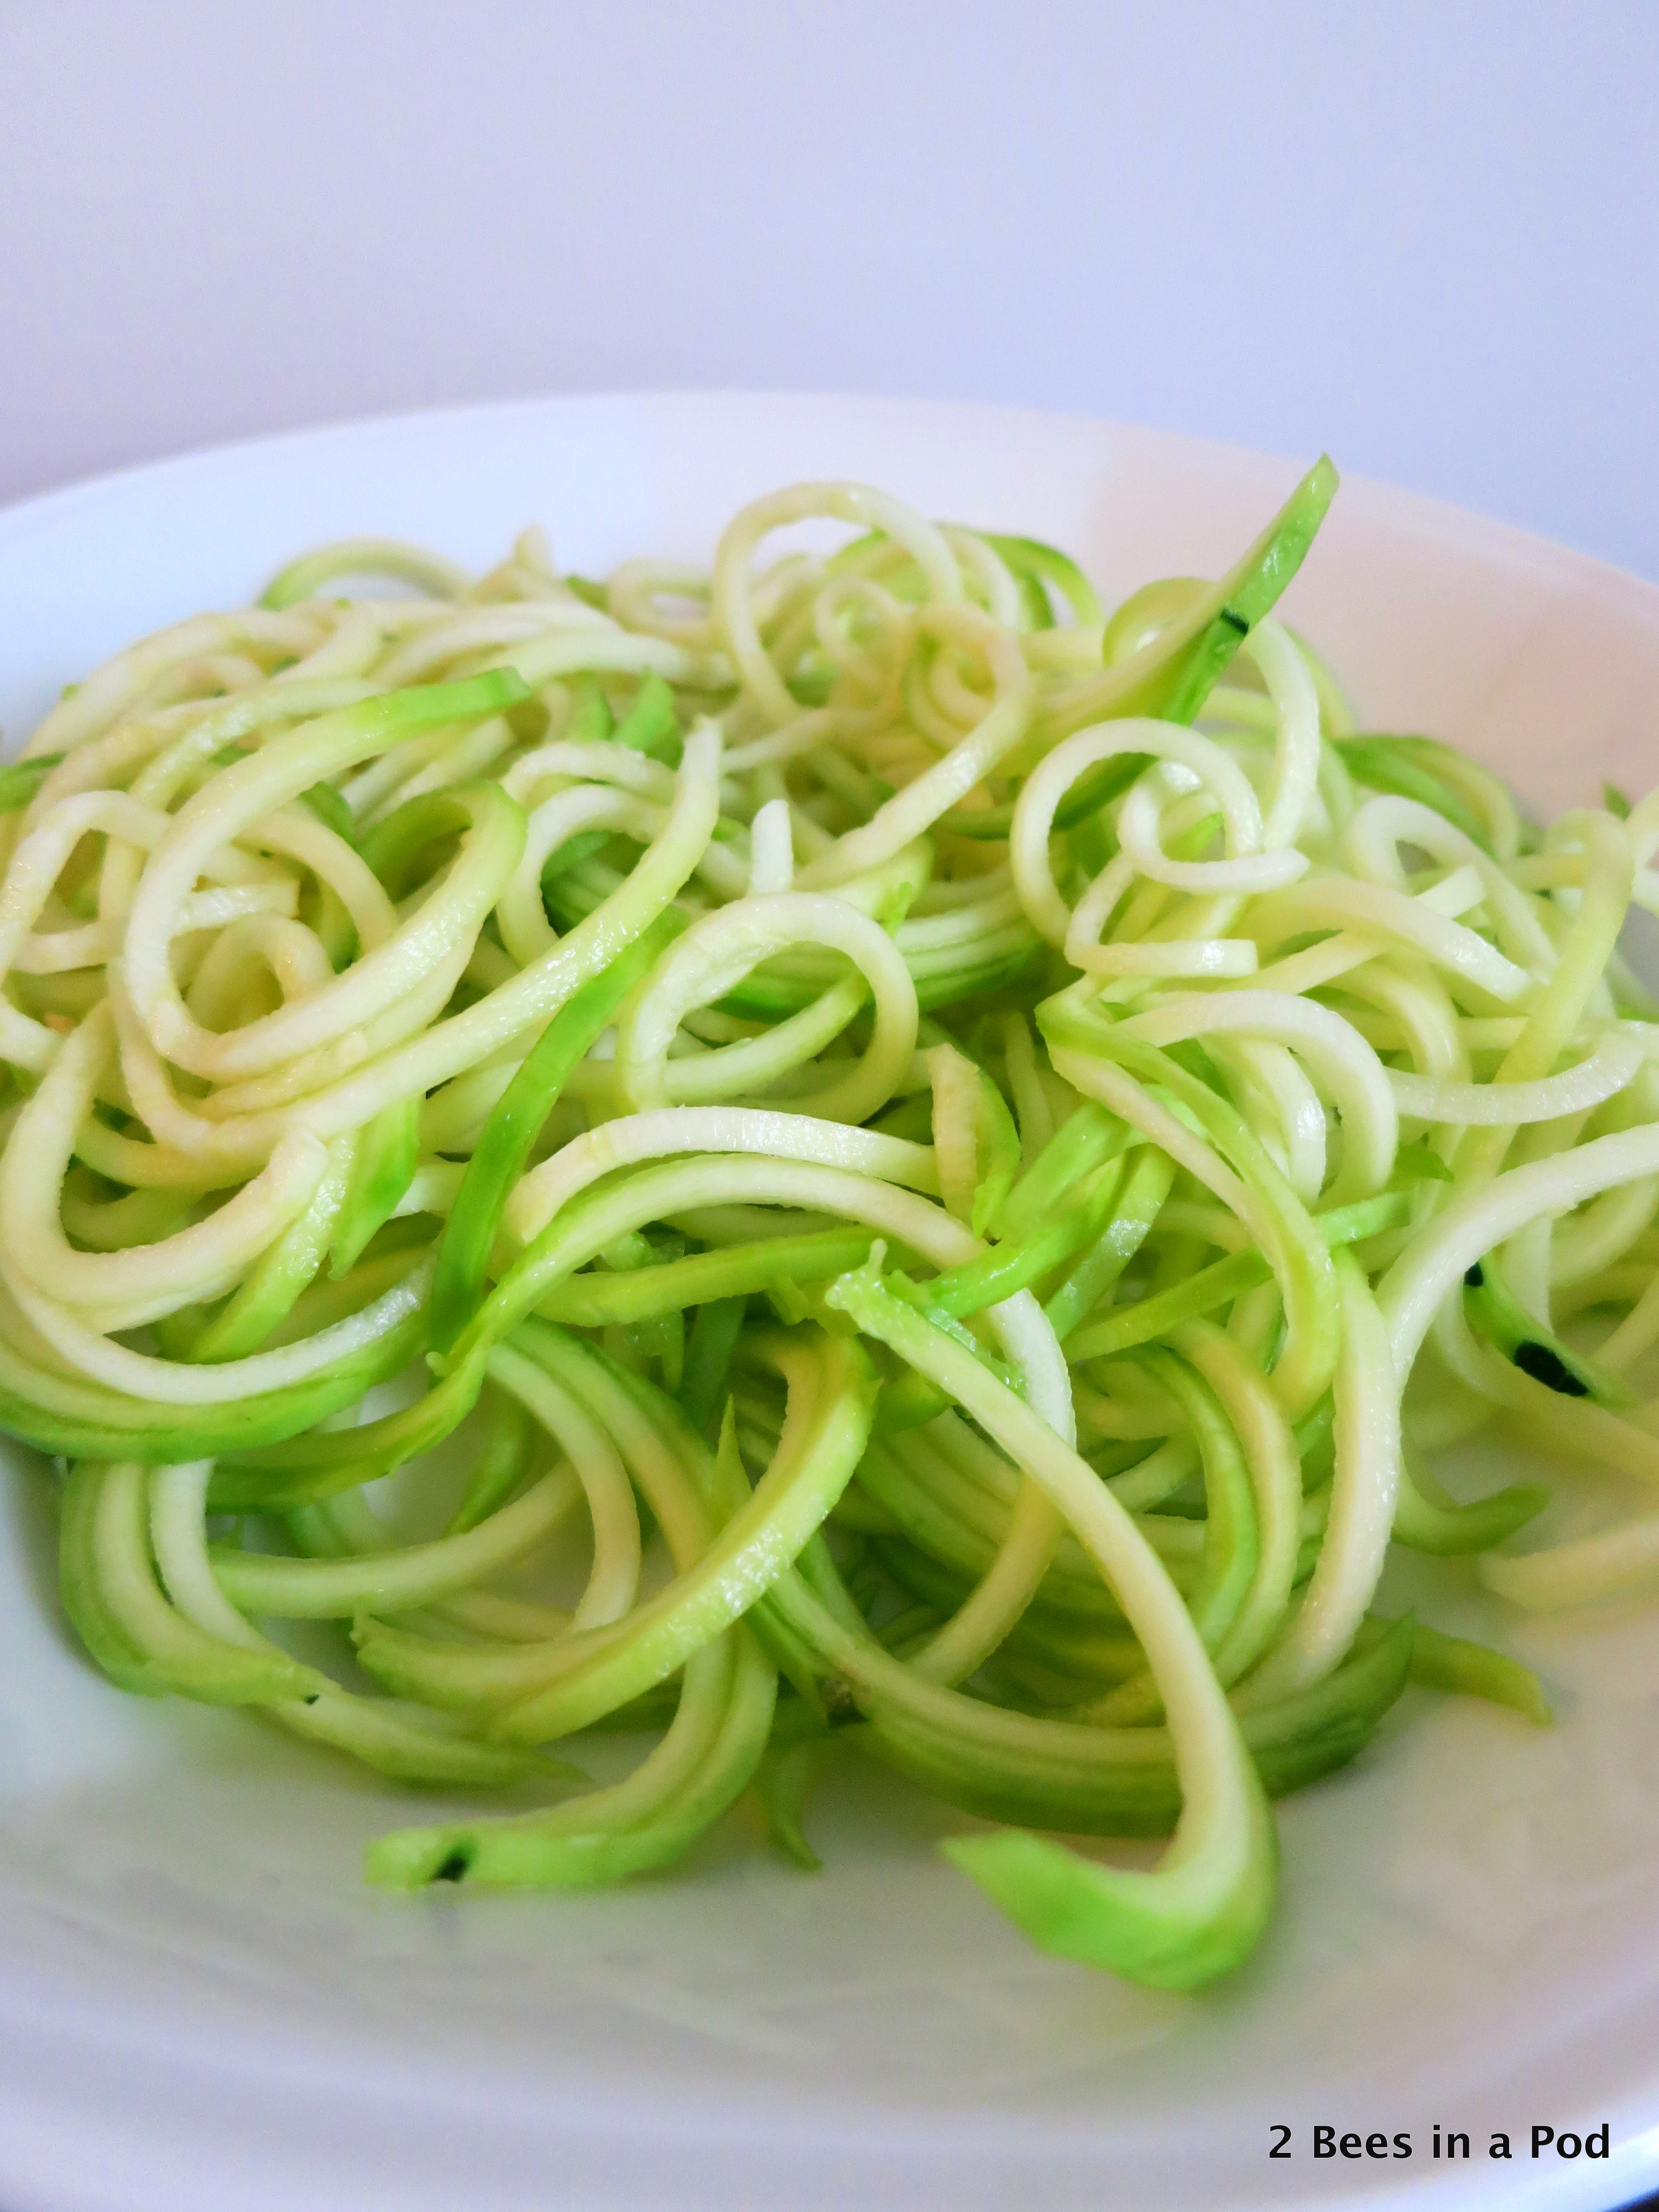 Zucchini to make zucchini noodles with Spiral Vegetable Slicer